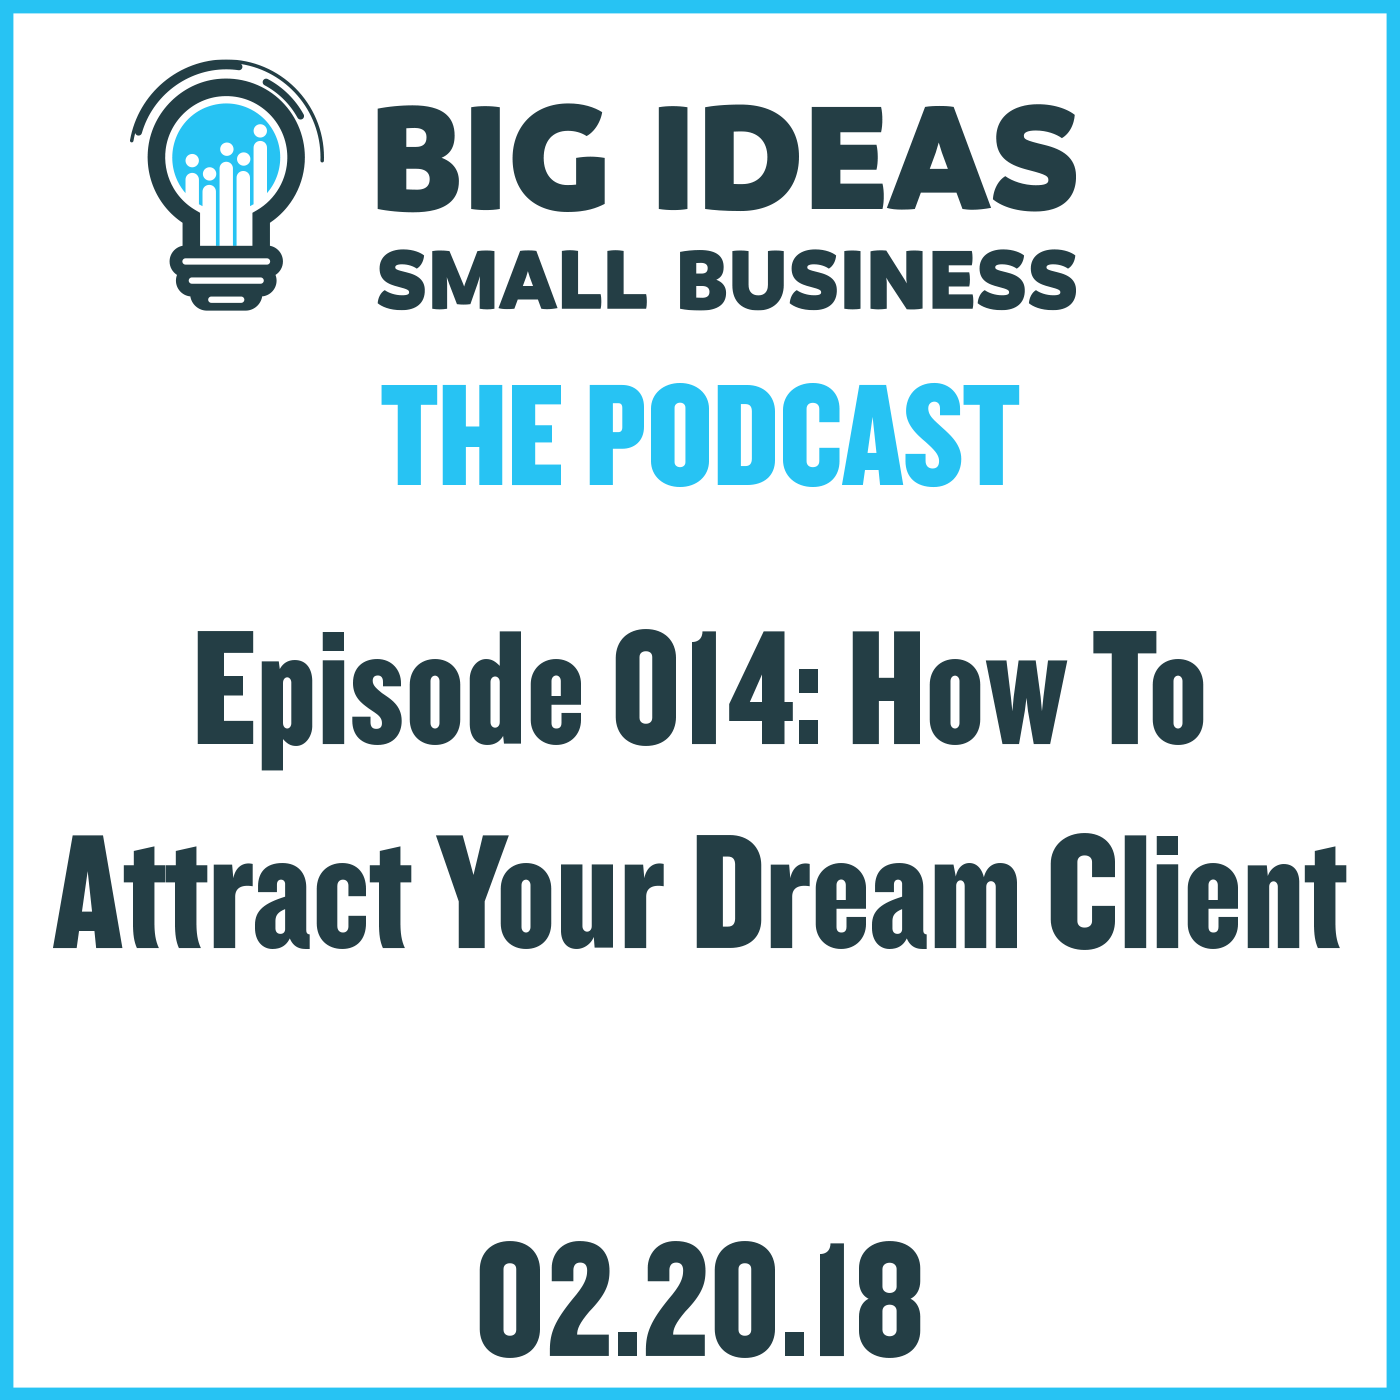 How to Attract Your Dream Client